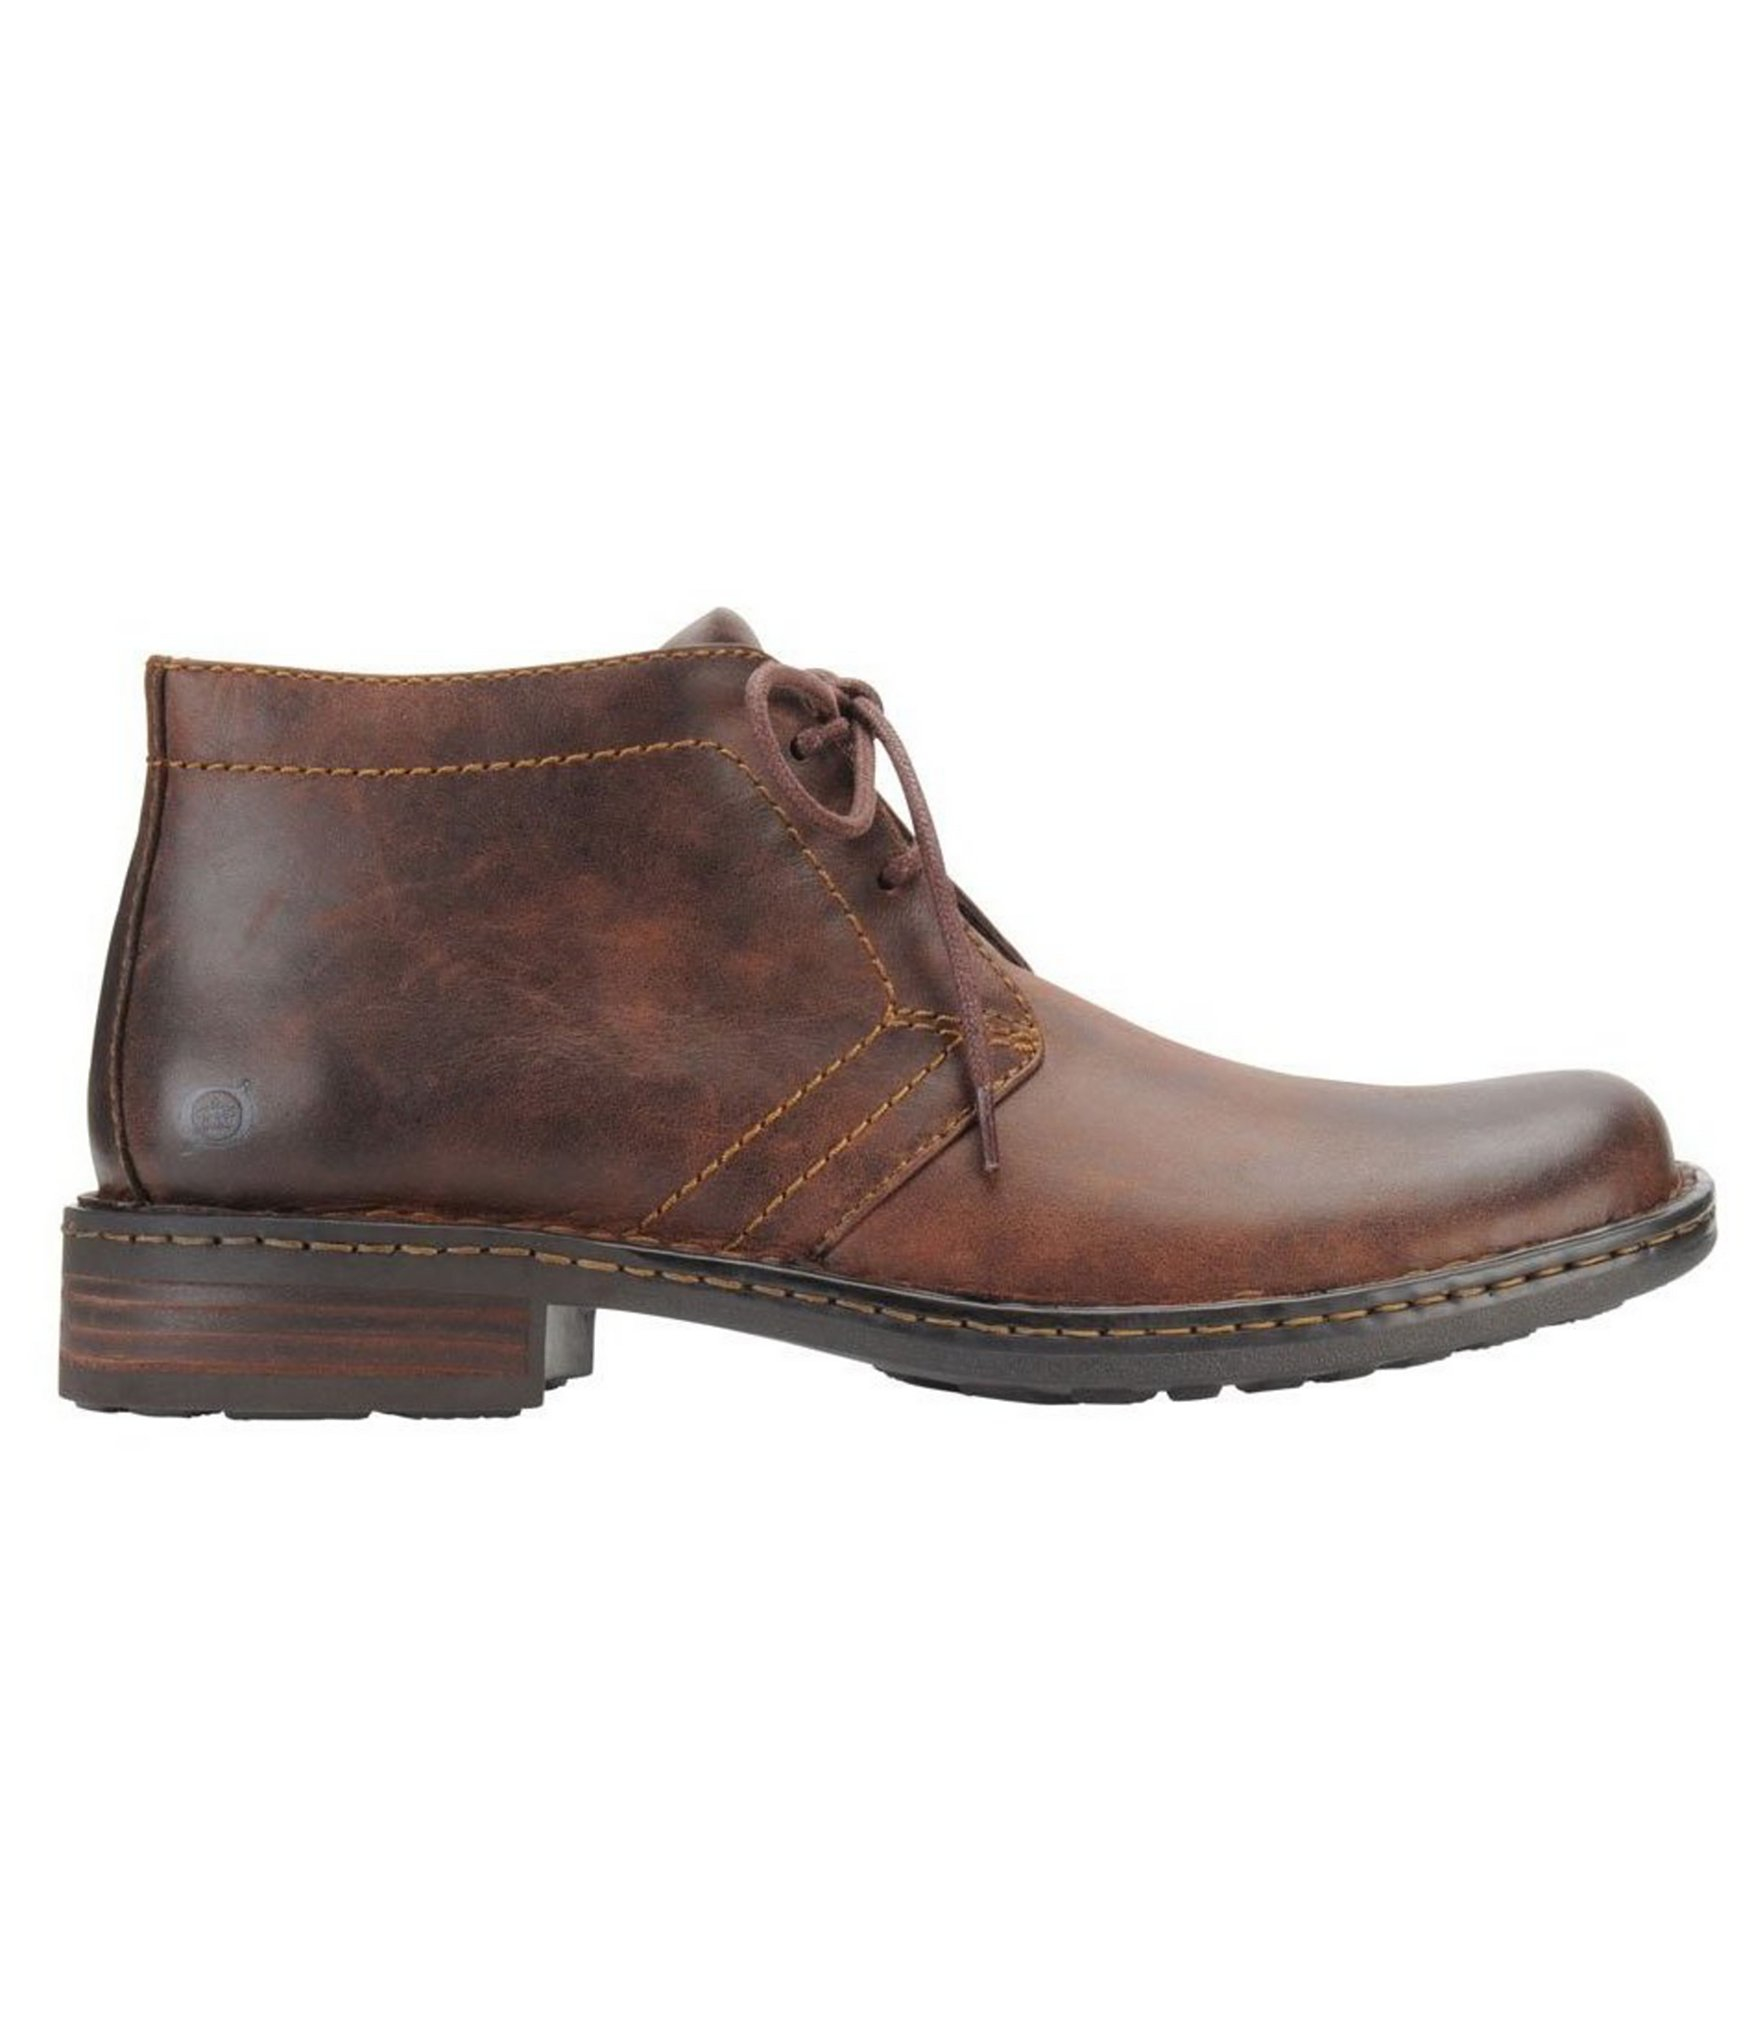 Lyst - Born Harrison Chukka Boots in Brown for Men